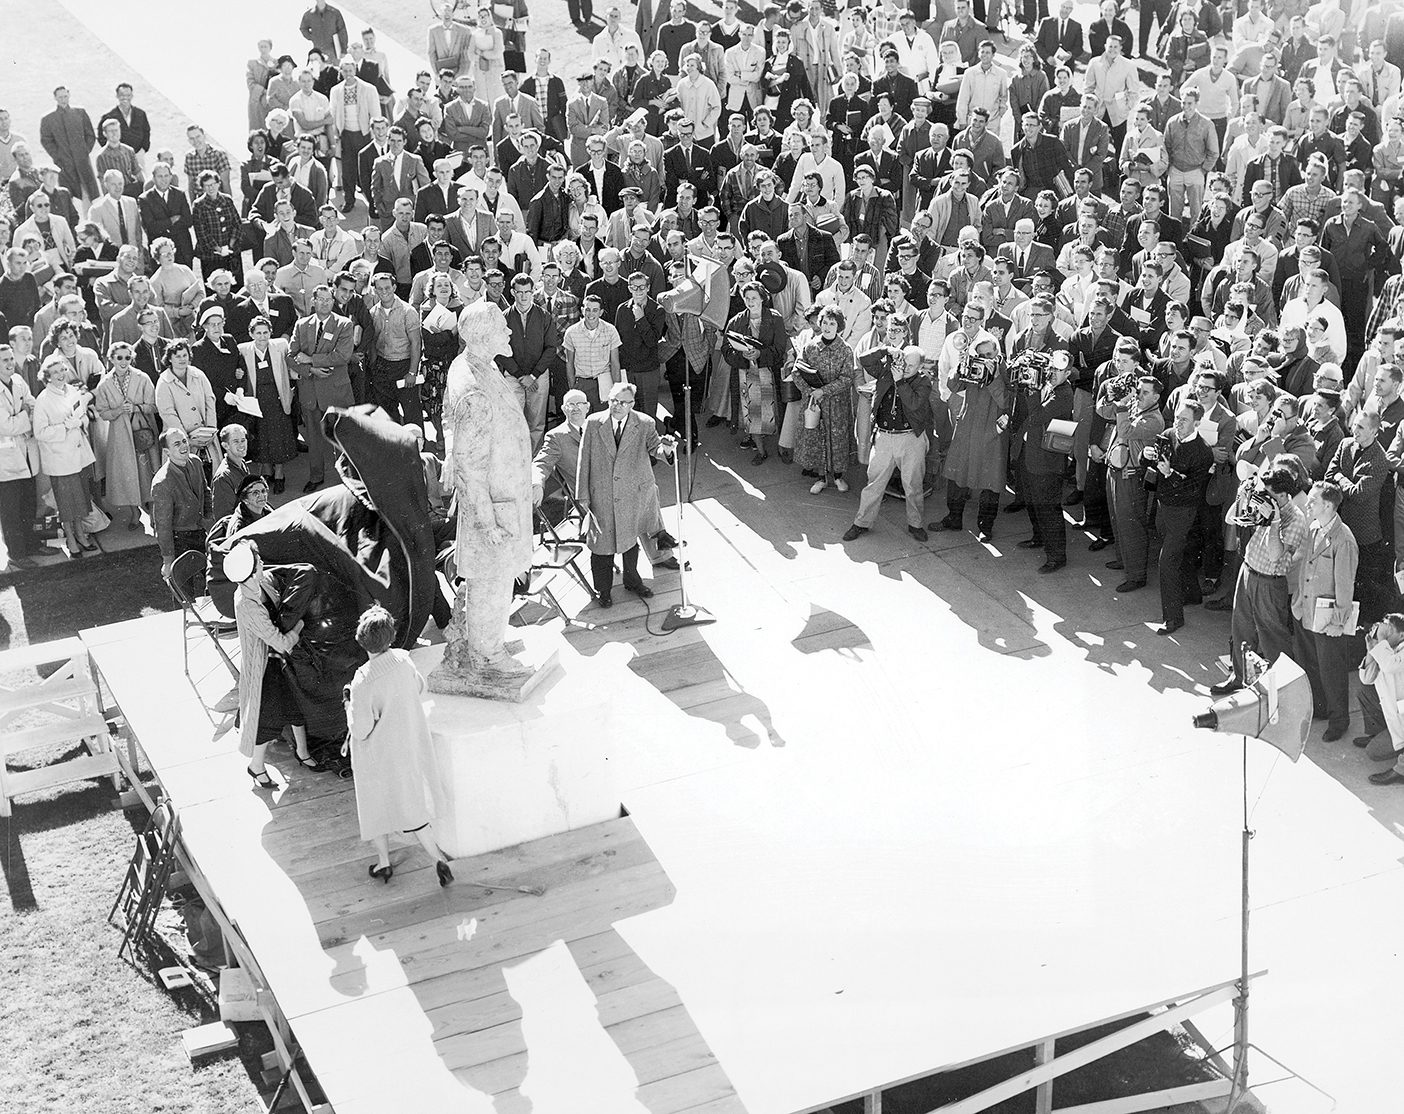 An old photo of the unveiling of the Karl G. Maeser statue placed outside of a building with a crowd and photographers gathered around to see it.